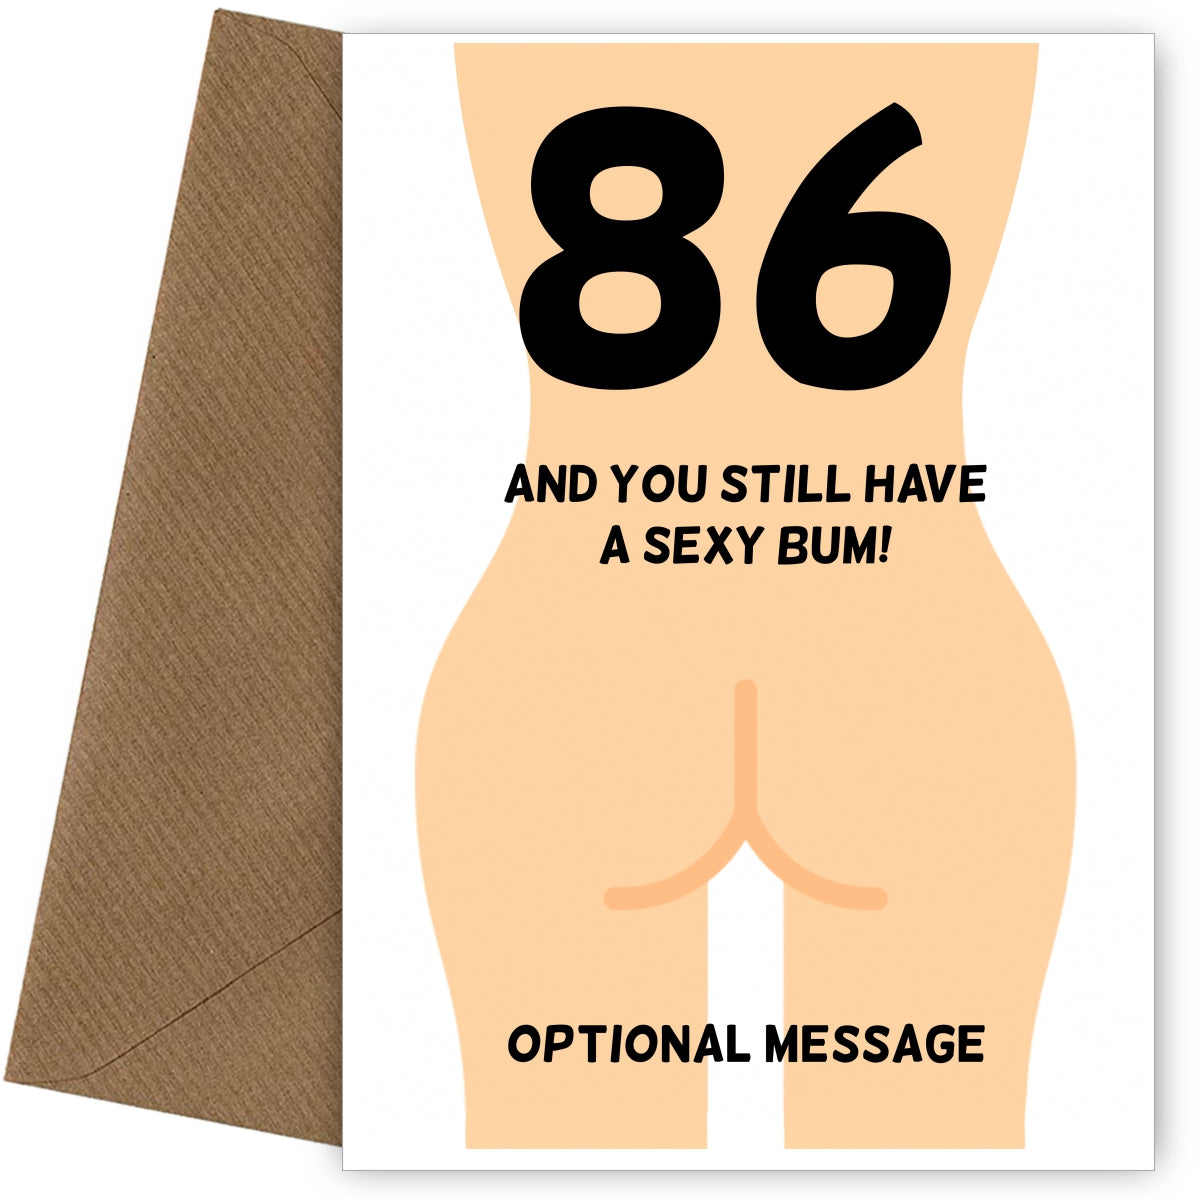 Happy 86th Birthday Card - 86 and Still Have a Sexy Bum!